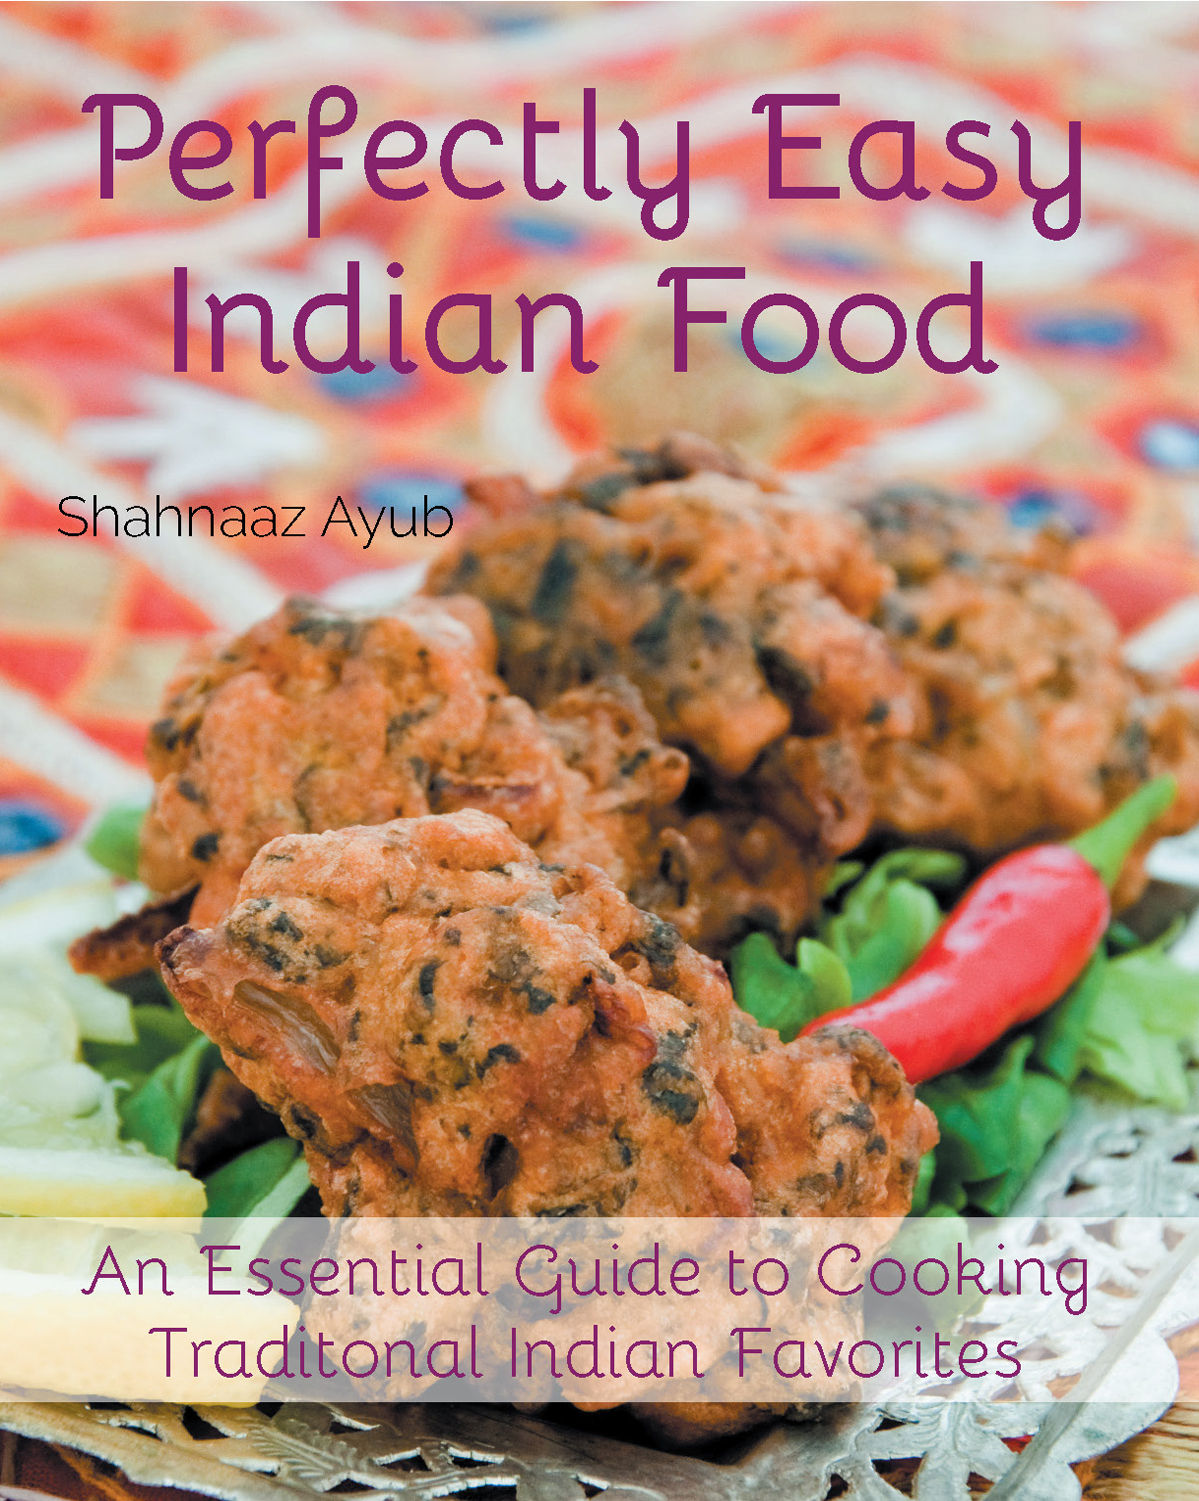 Shahnaaz Ayub Perfectly Easy Indian Food An Essential Guide to Cooking - photo 1